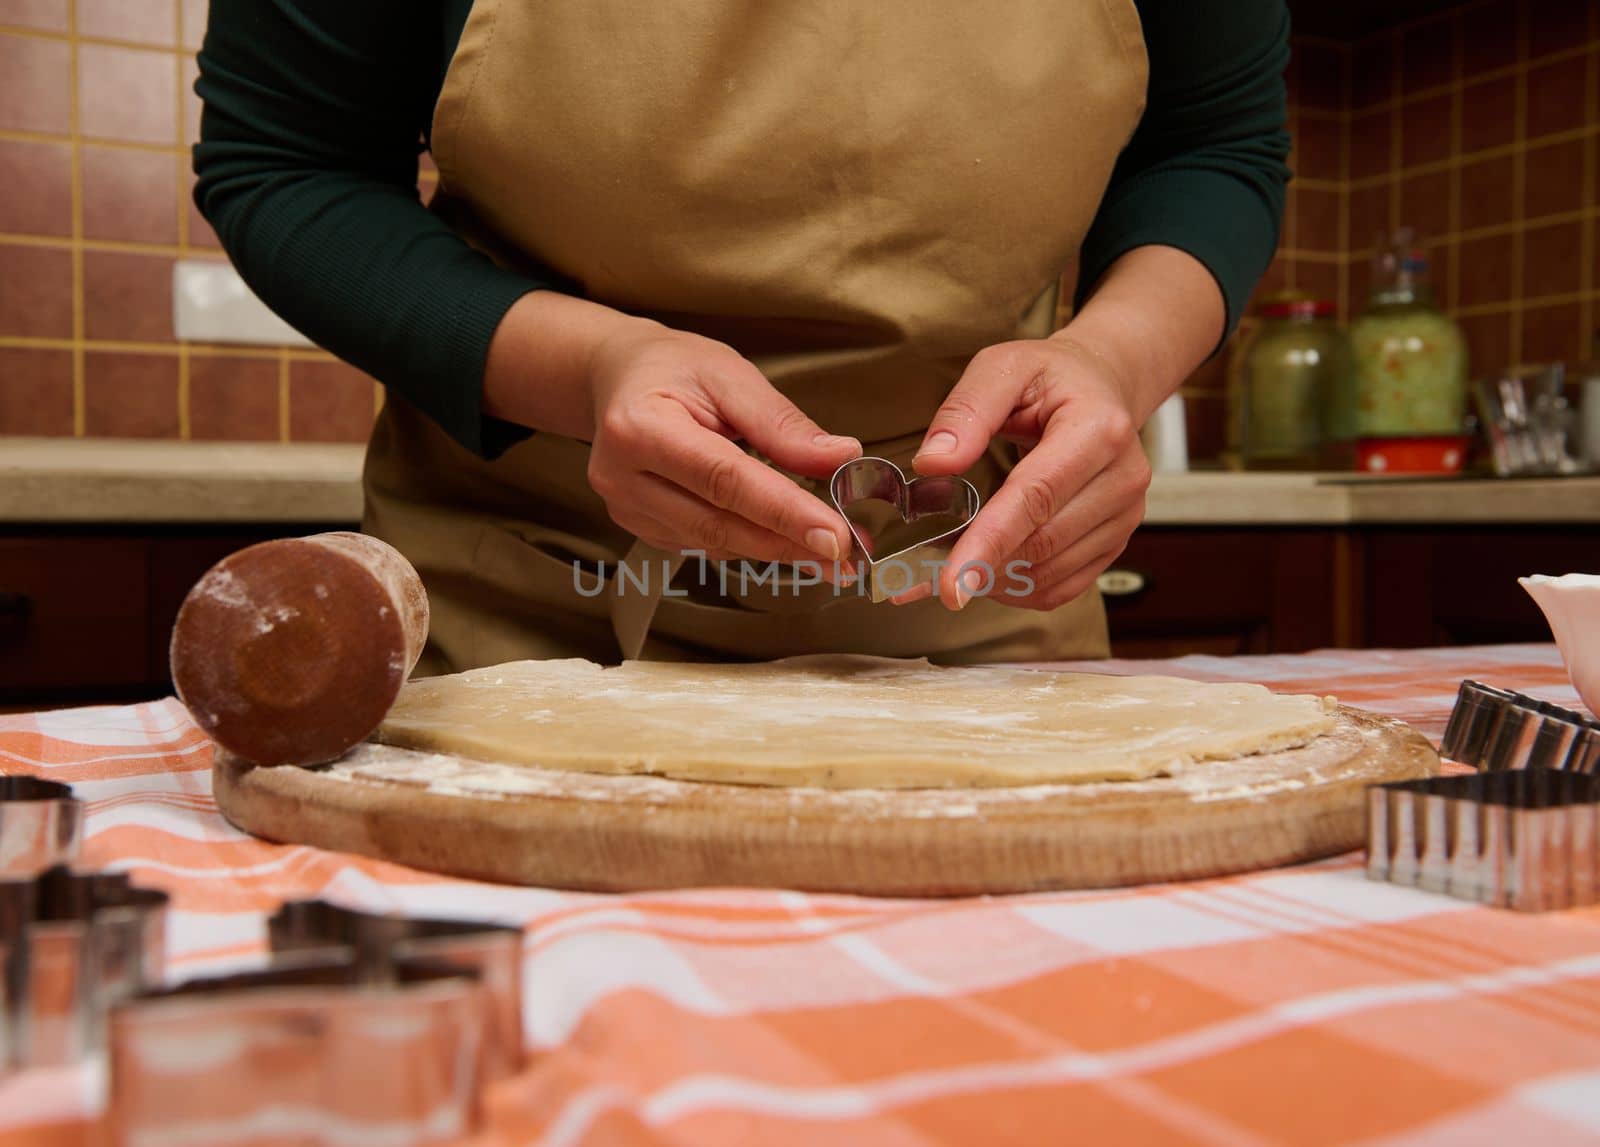 Details: hands of a woman chef confectioner, baker holding a heart shaped cookie cutter above a rolled out dough, while preparing gingerbread pastries for Christmas. Culinary. Baking festive items